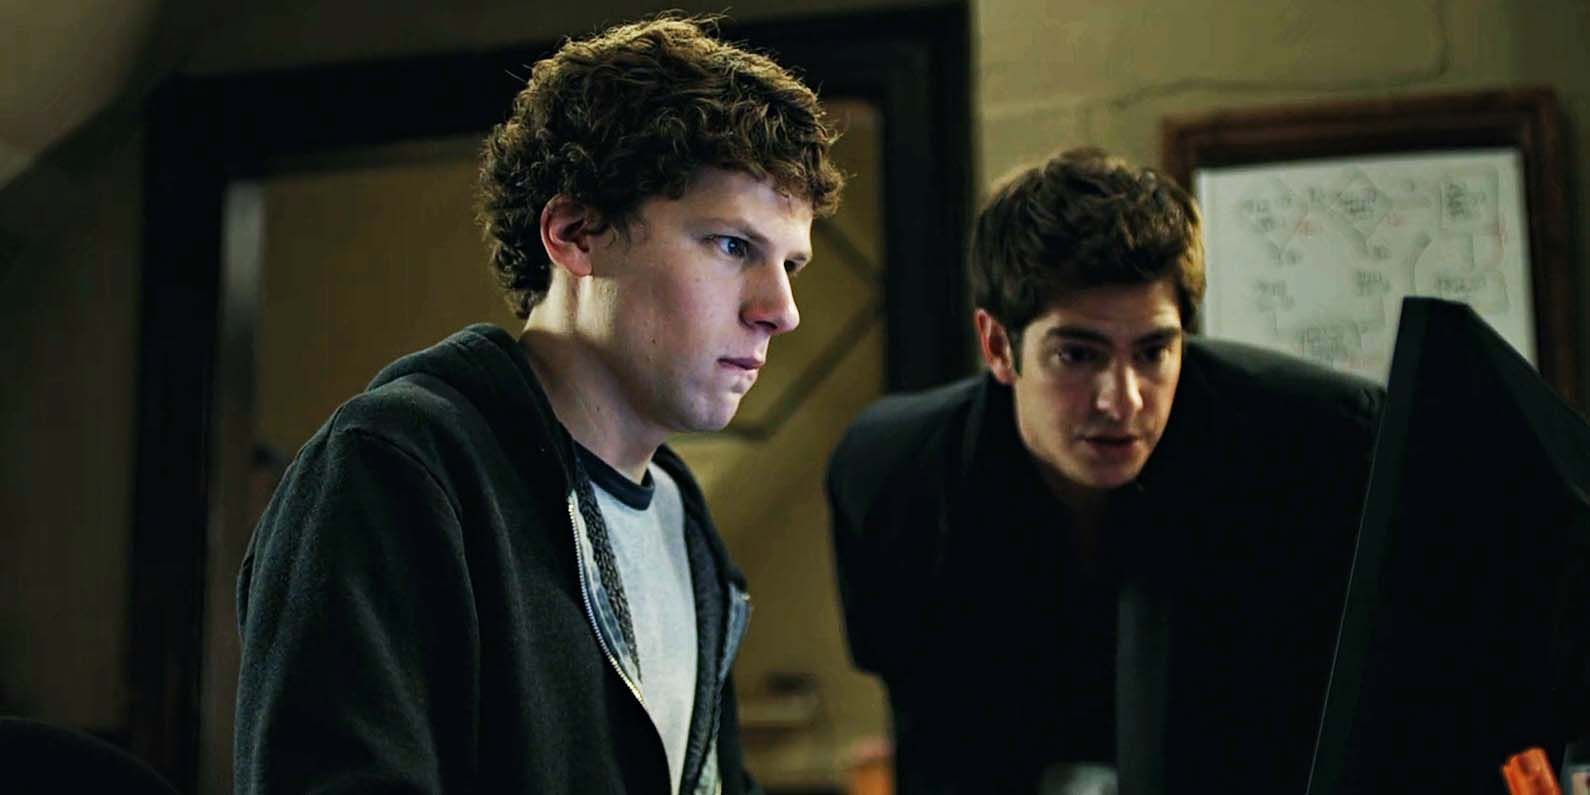 Mark Zuckerberg (Jesse Eisenberg) and Eduardo Saverin (Andrew Garfield) looking at a computer in The Social Network